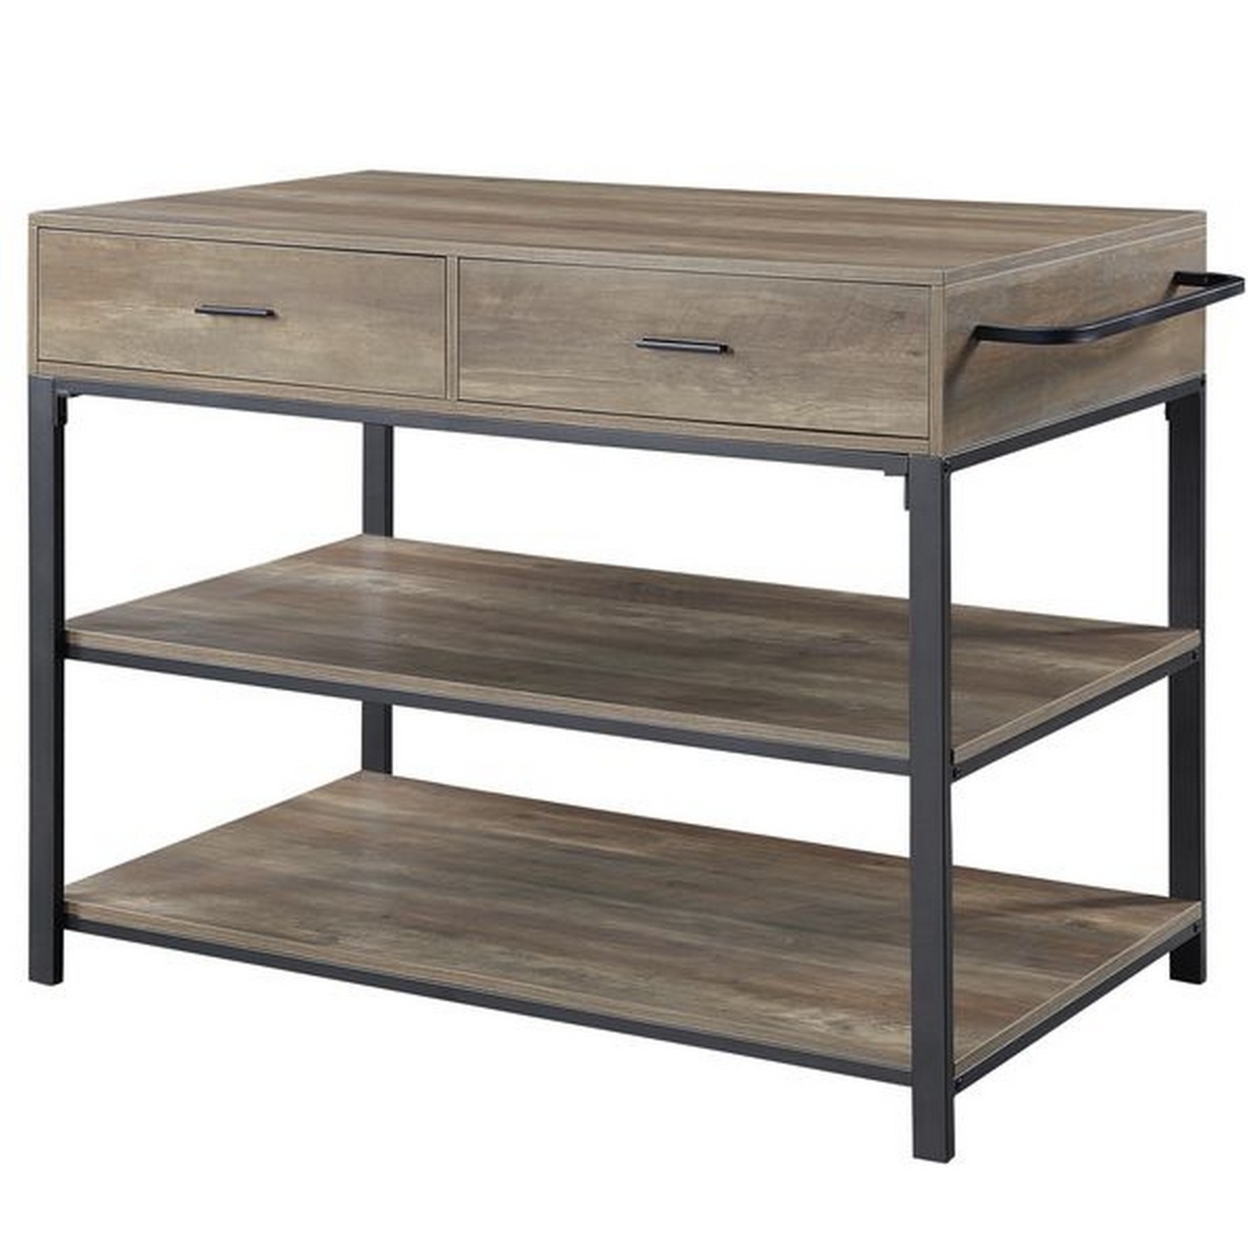 3 Tier Kitchen Island With 2 Drawers And Metal Frame, Brown And Black- Saltoro Sherpi